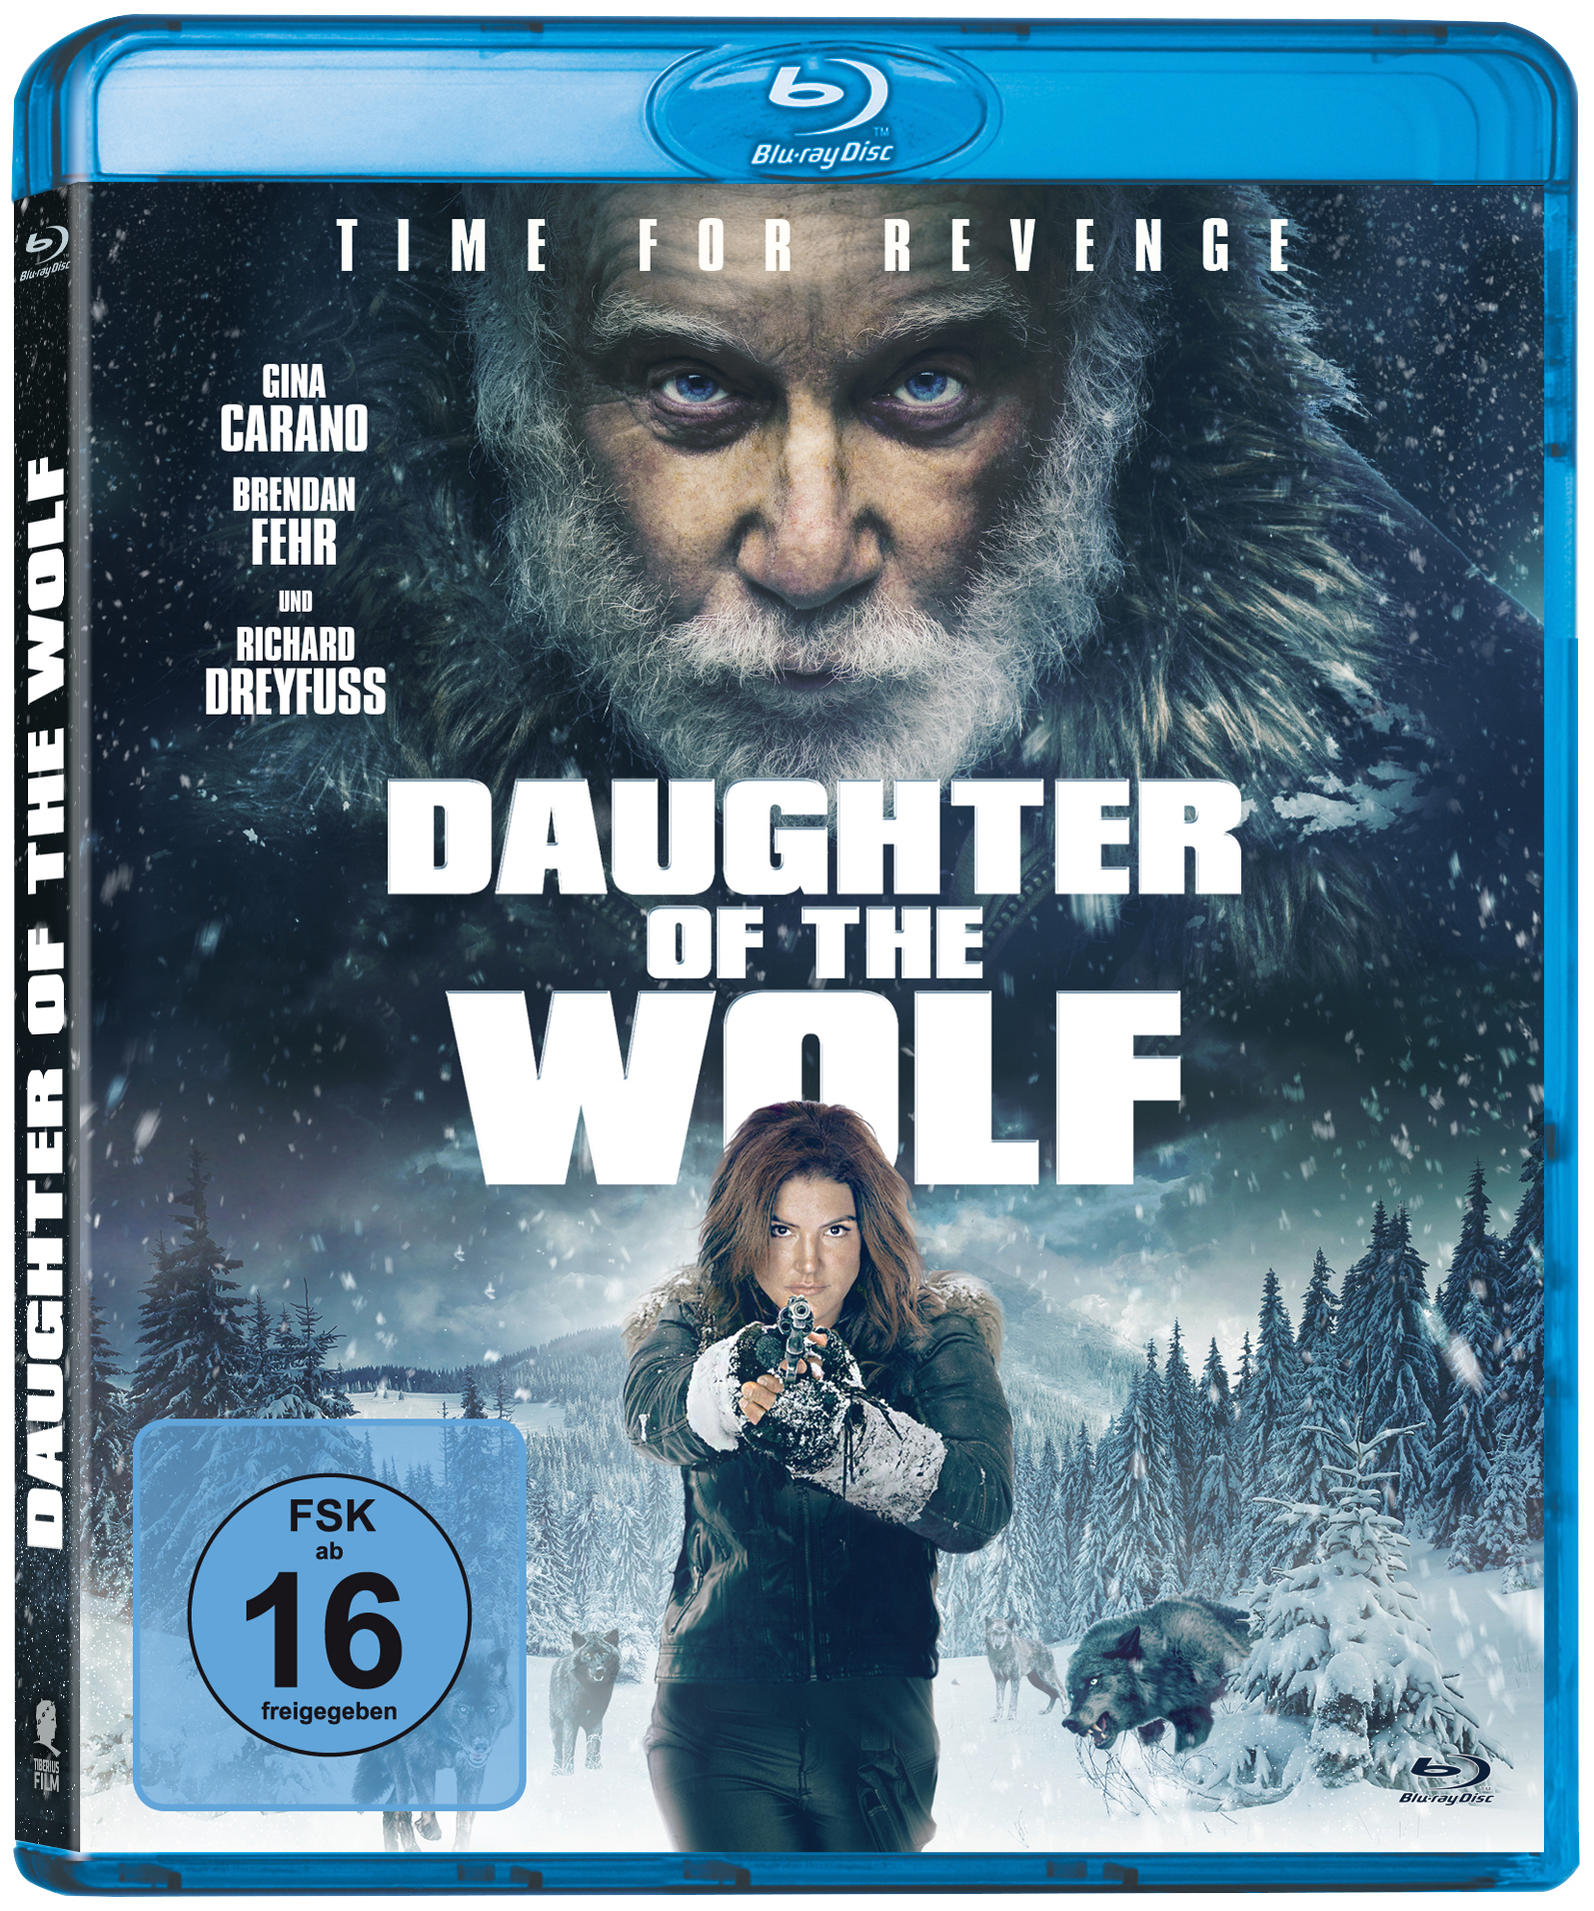 Blu-ray Daughter Wolf the of